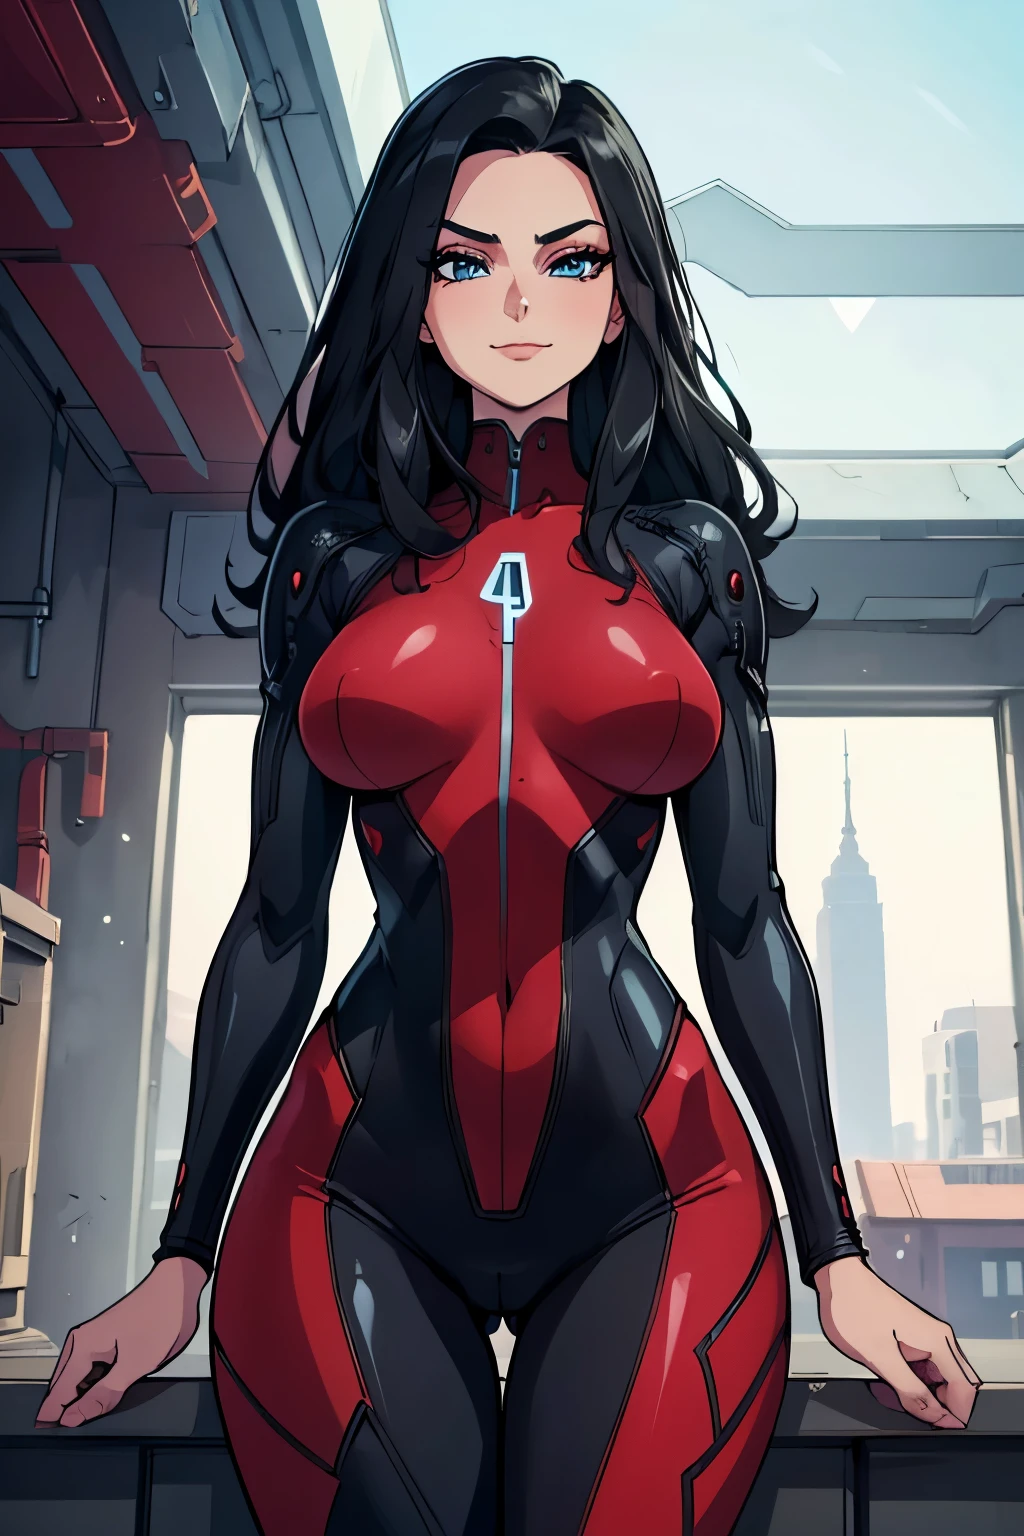 (work of art, Best quality, absurd, 4K, aesthetics, perfect eyes, perfect face, detailed, intricate, Perfect Lighting) 1 girl with fair skin, long dark hair, wears a futuristic red and black bodysuit, heroine, queen of an alien race, warrior, gentle smile, perfect body